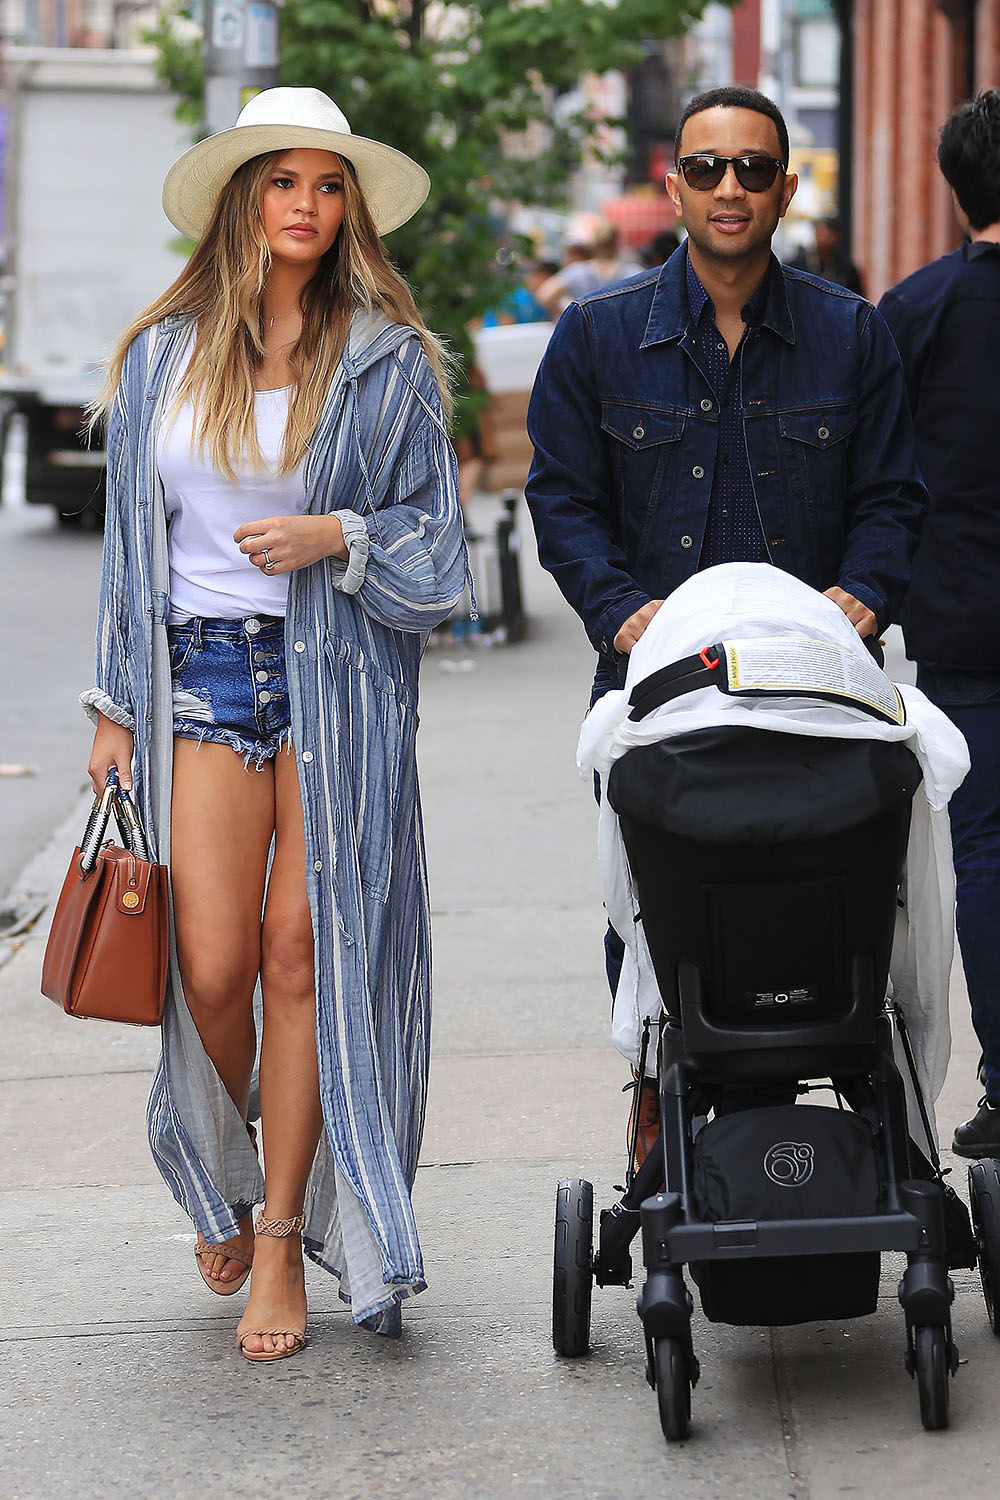 Victoria Secret Angel and new mum Chrissy Teigen looked chic and effortless out and about in New York with her husband John Legend and newborn daughter Luna.